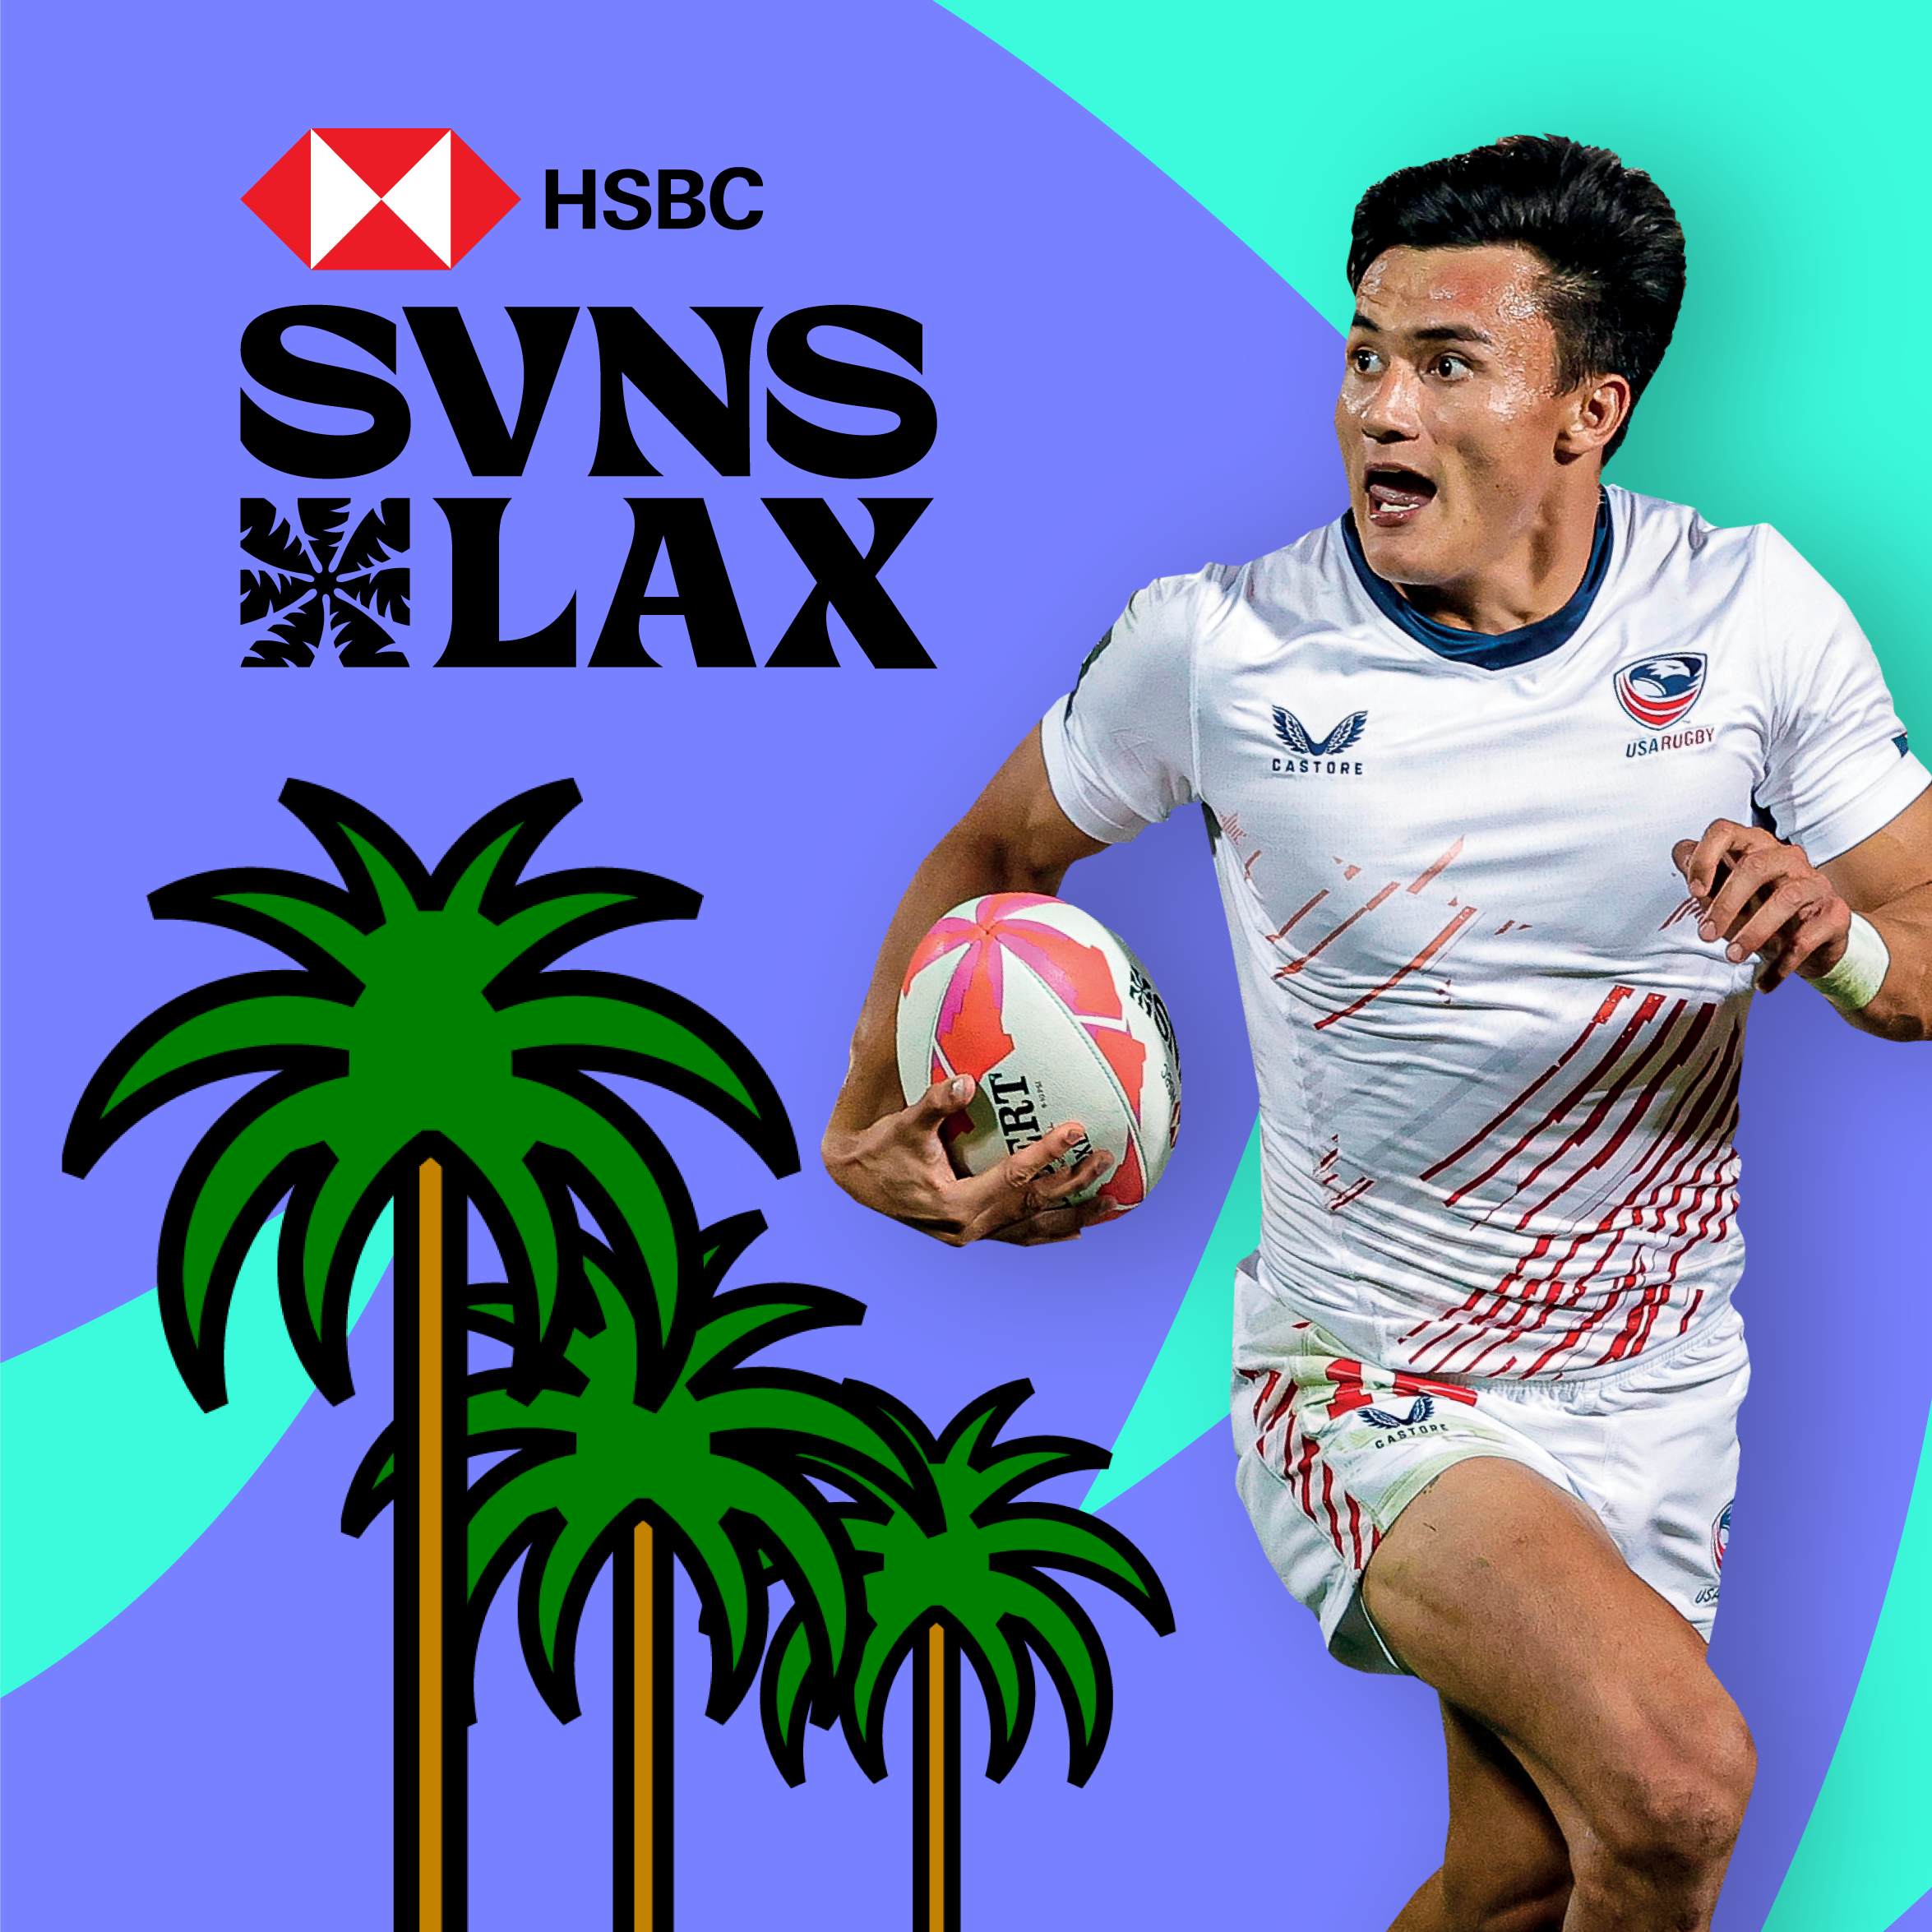 HSBC SVNS LAX expands the sevens experience with Friday Night Lights added to the weekend slate of events  